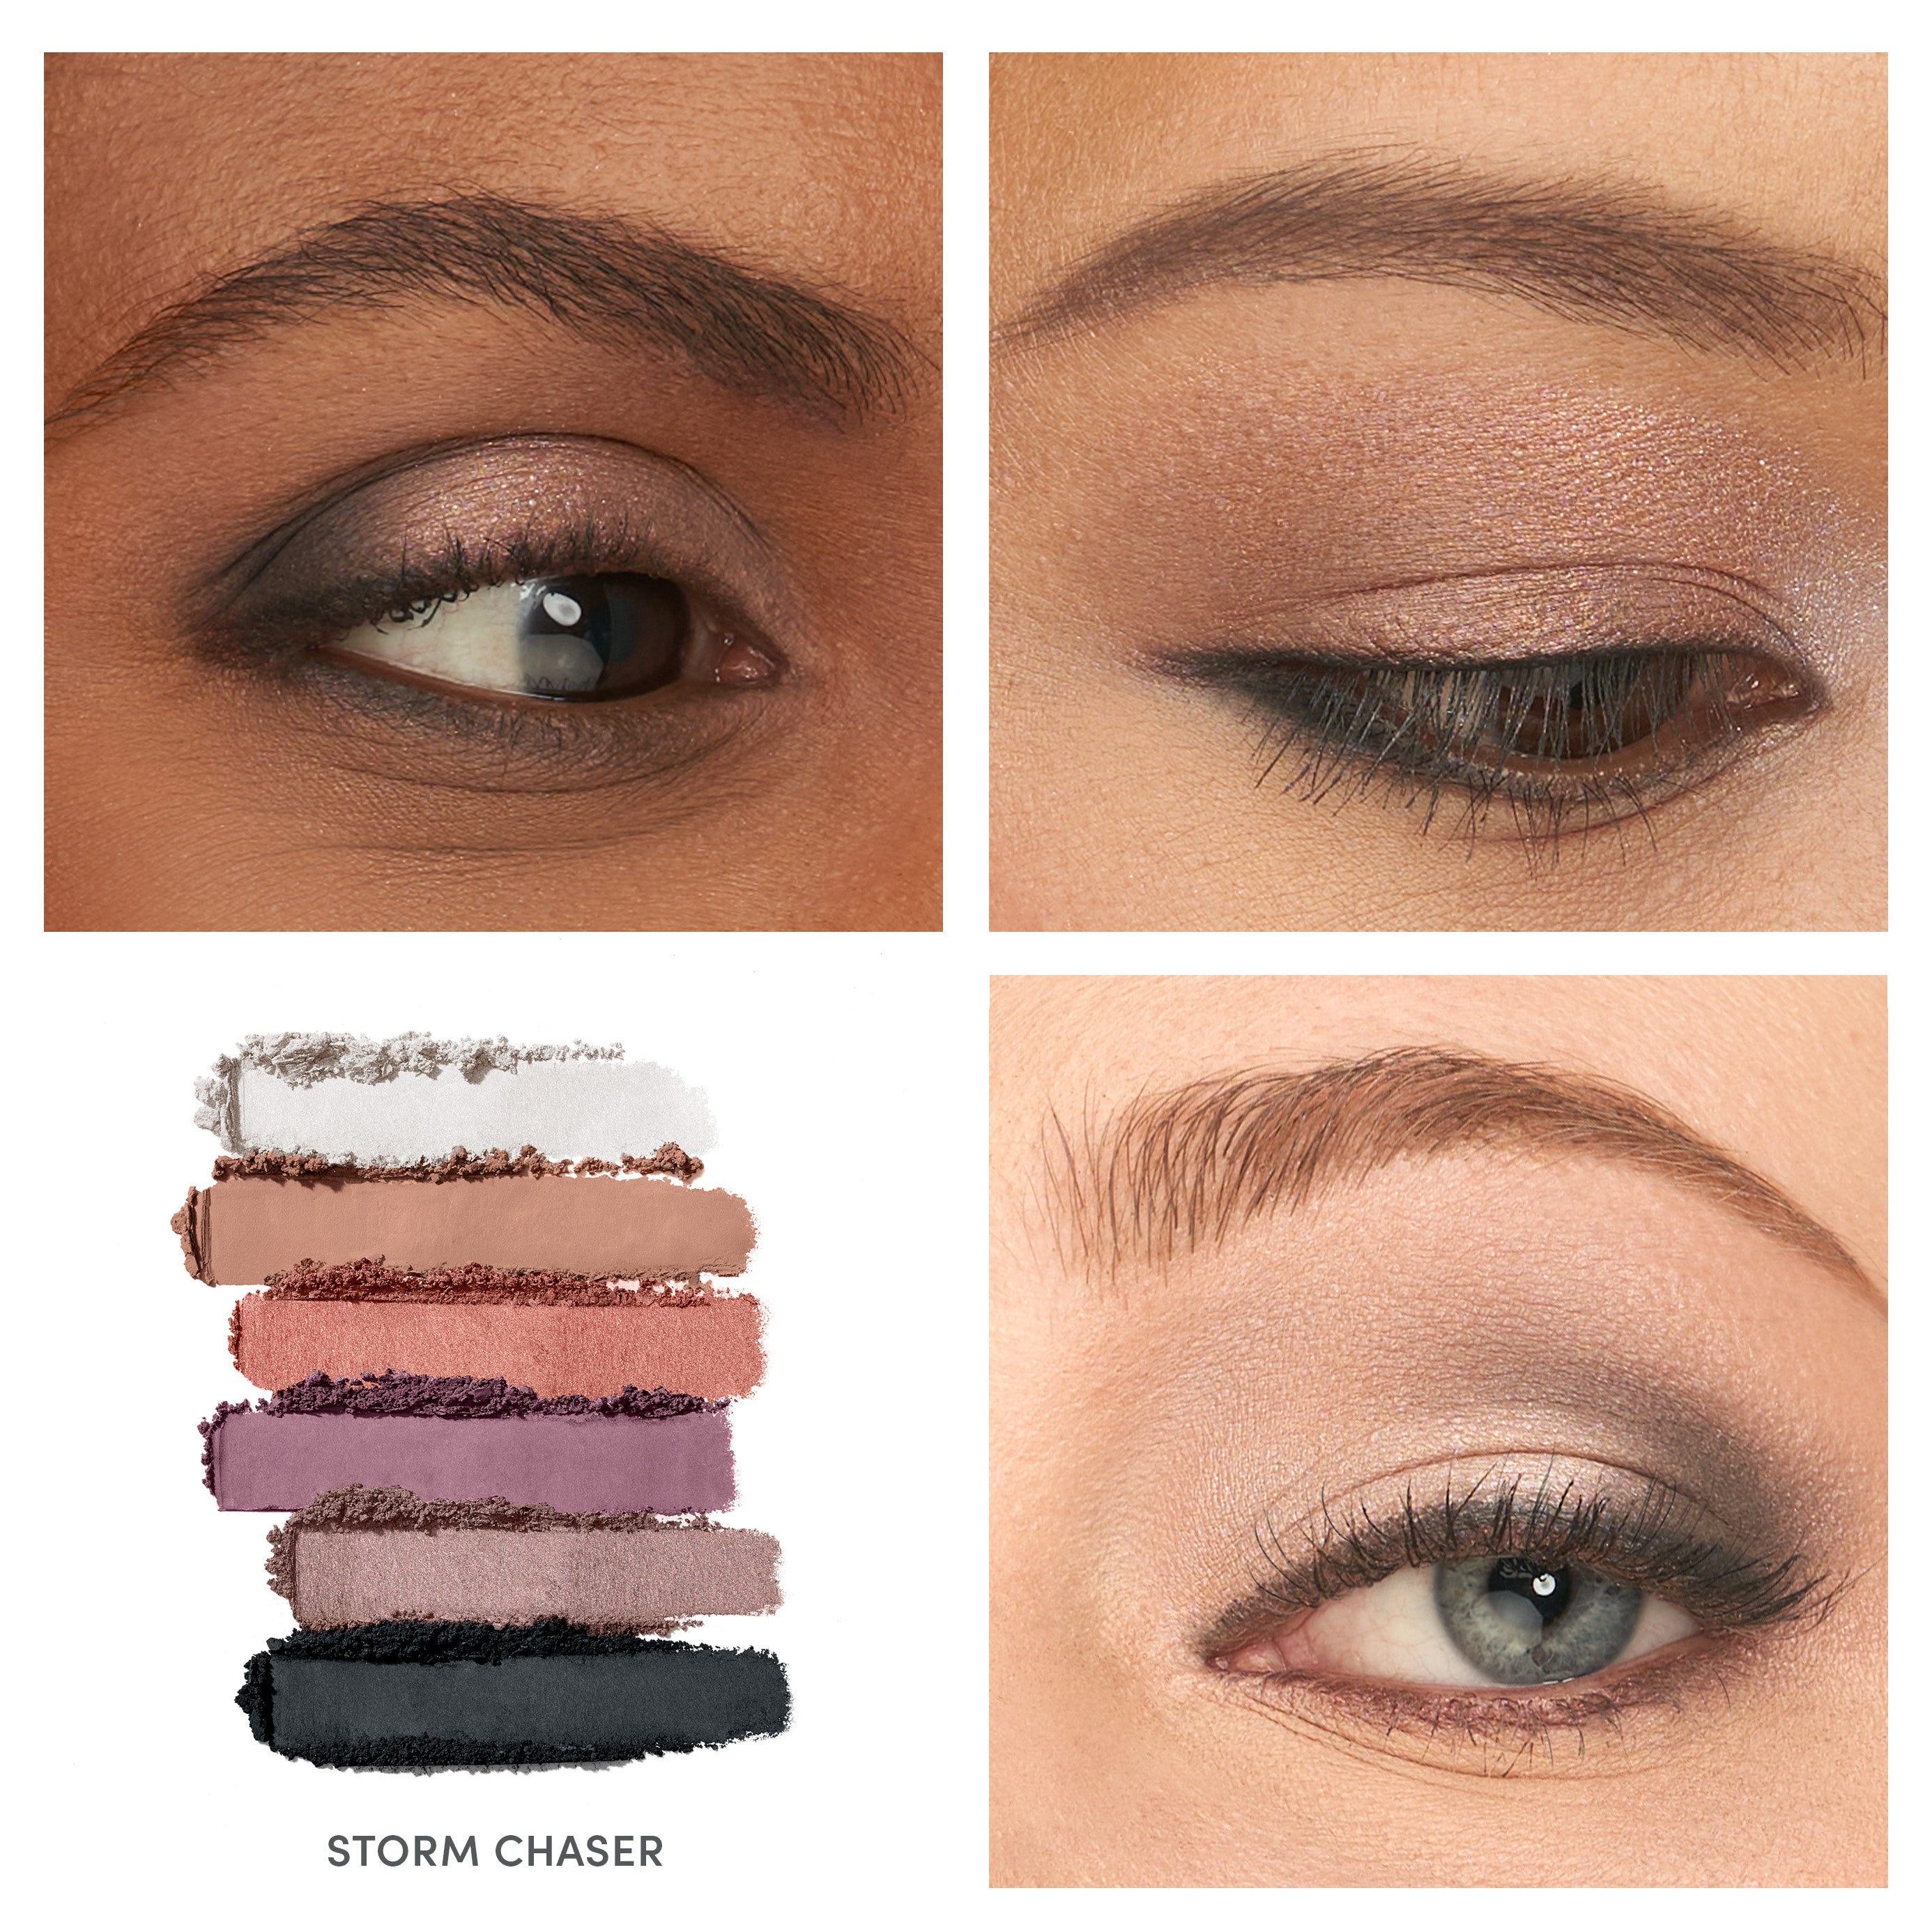 Different types of eye shadow application using the Storm Chaser palette jane iredale